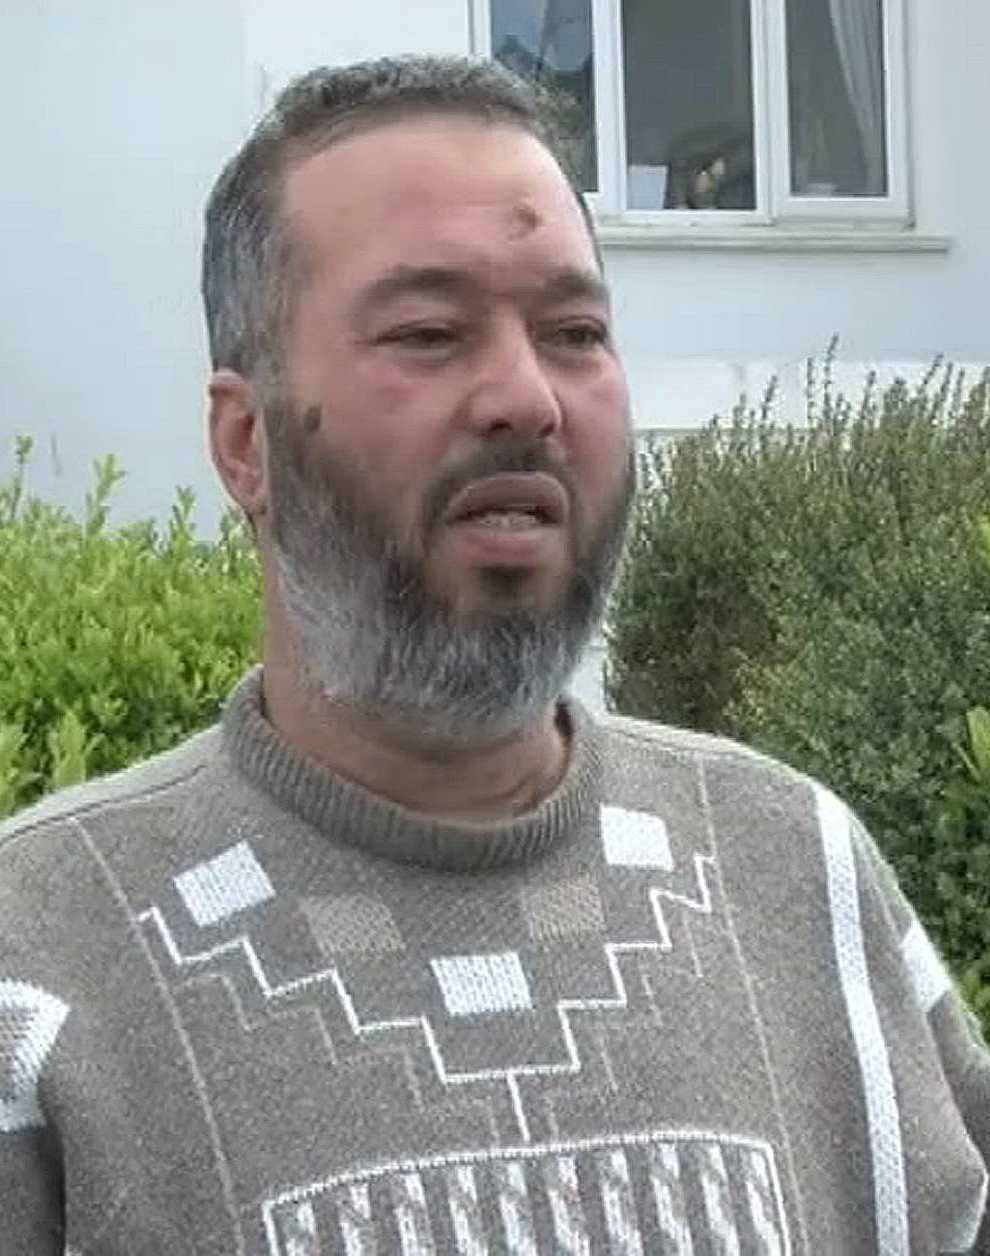 The Charity Commission has launched an investigation into Brighton Mosque amid concerns resulting from a failure to resolve a dispute after former trustee Abubaker Deghayes was convicted of encouraging terrorism (PA)